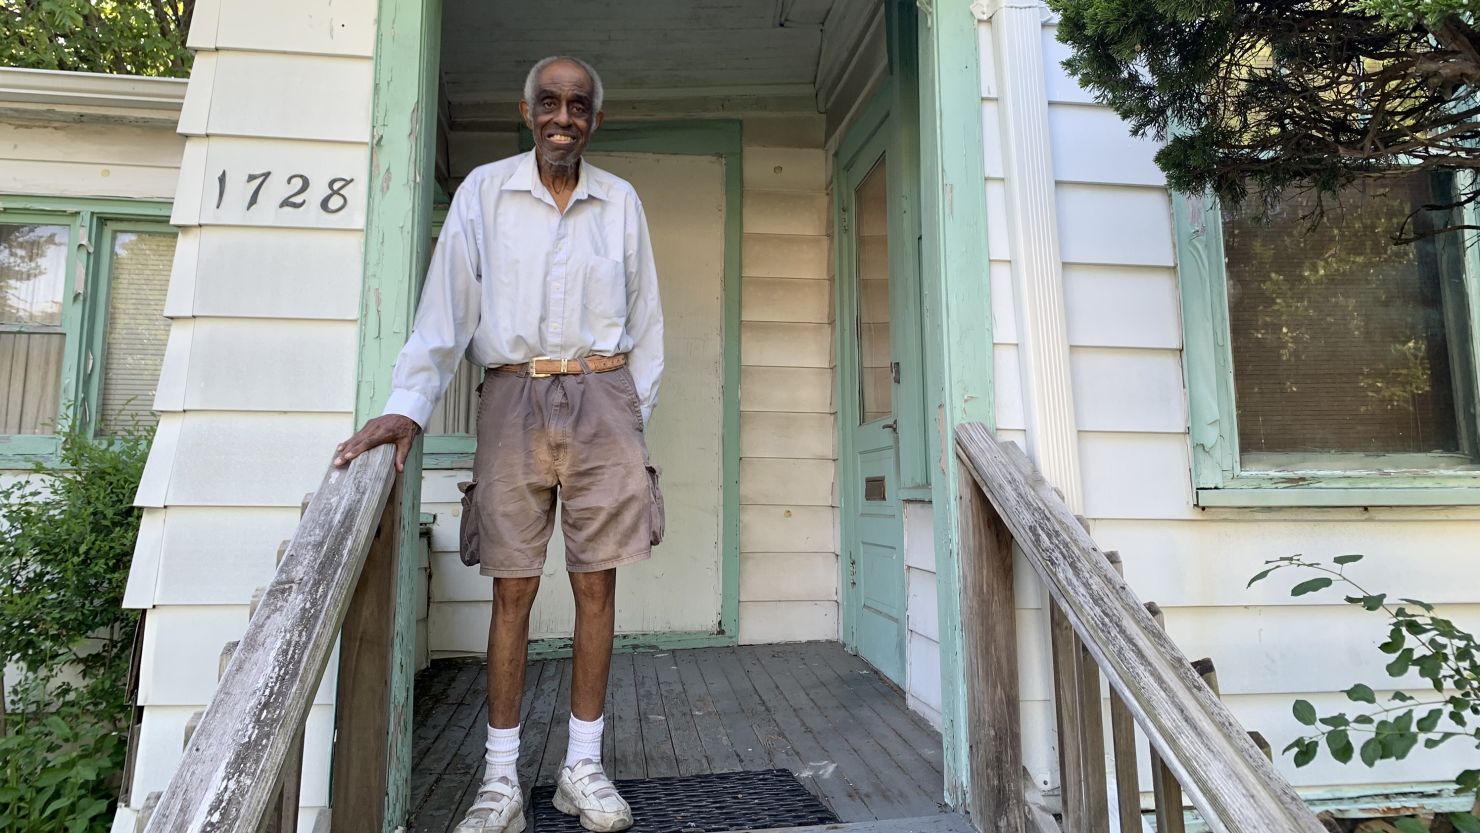 Louis Weathers says racial discrimination in Evanston, Illinois, made house-hunting difficult for him decades ago.